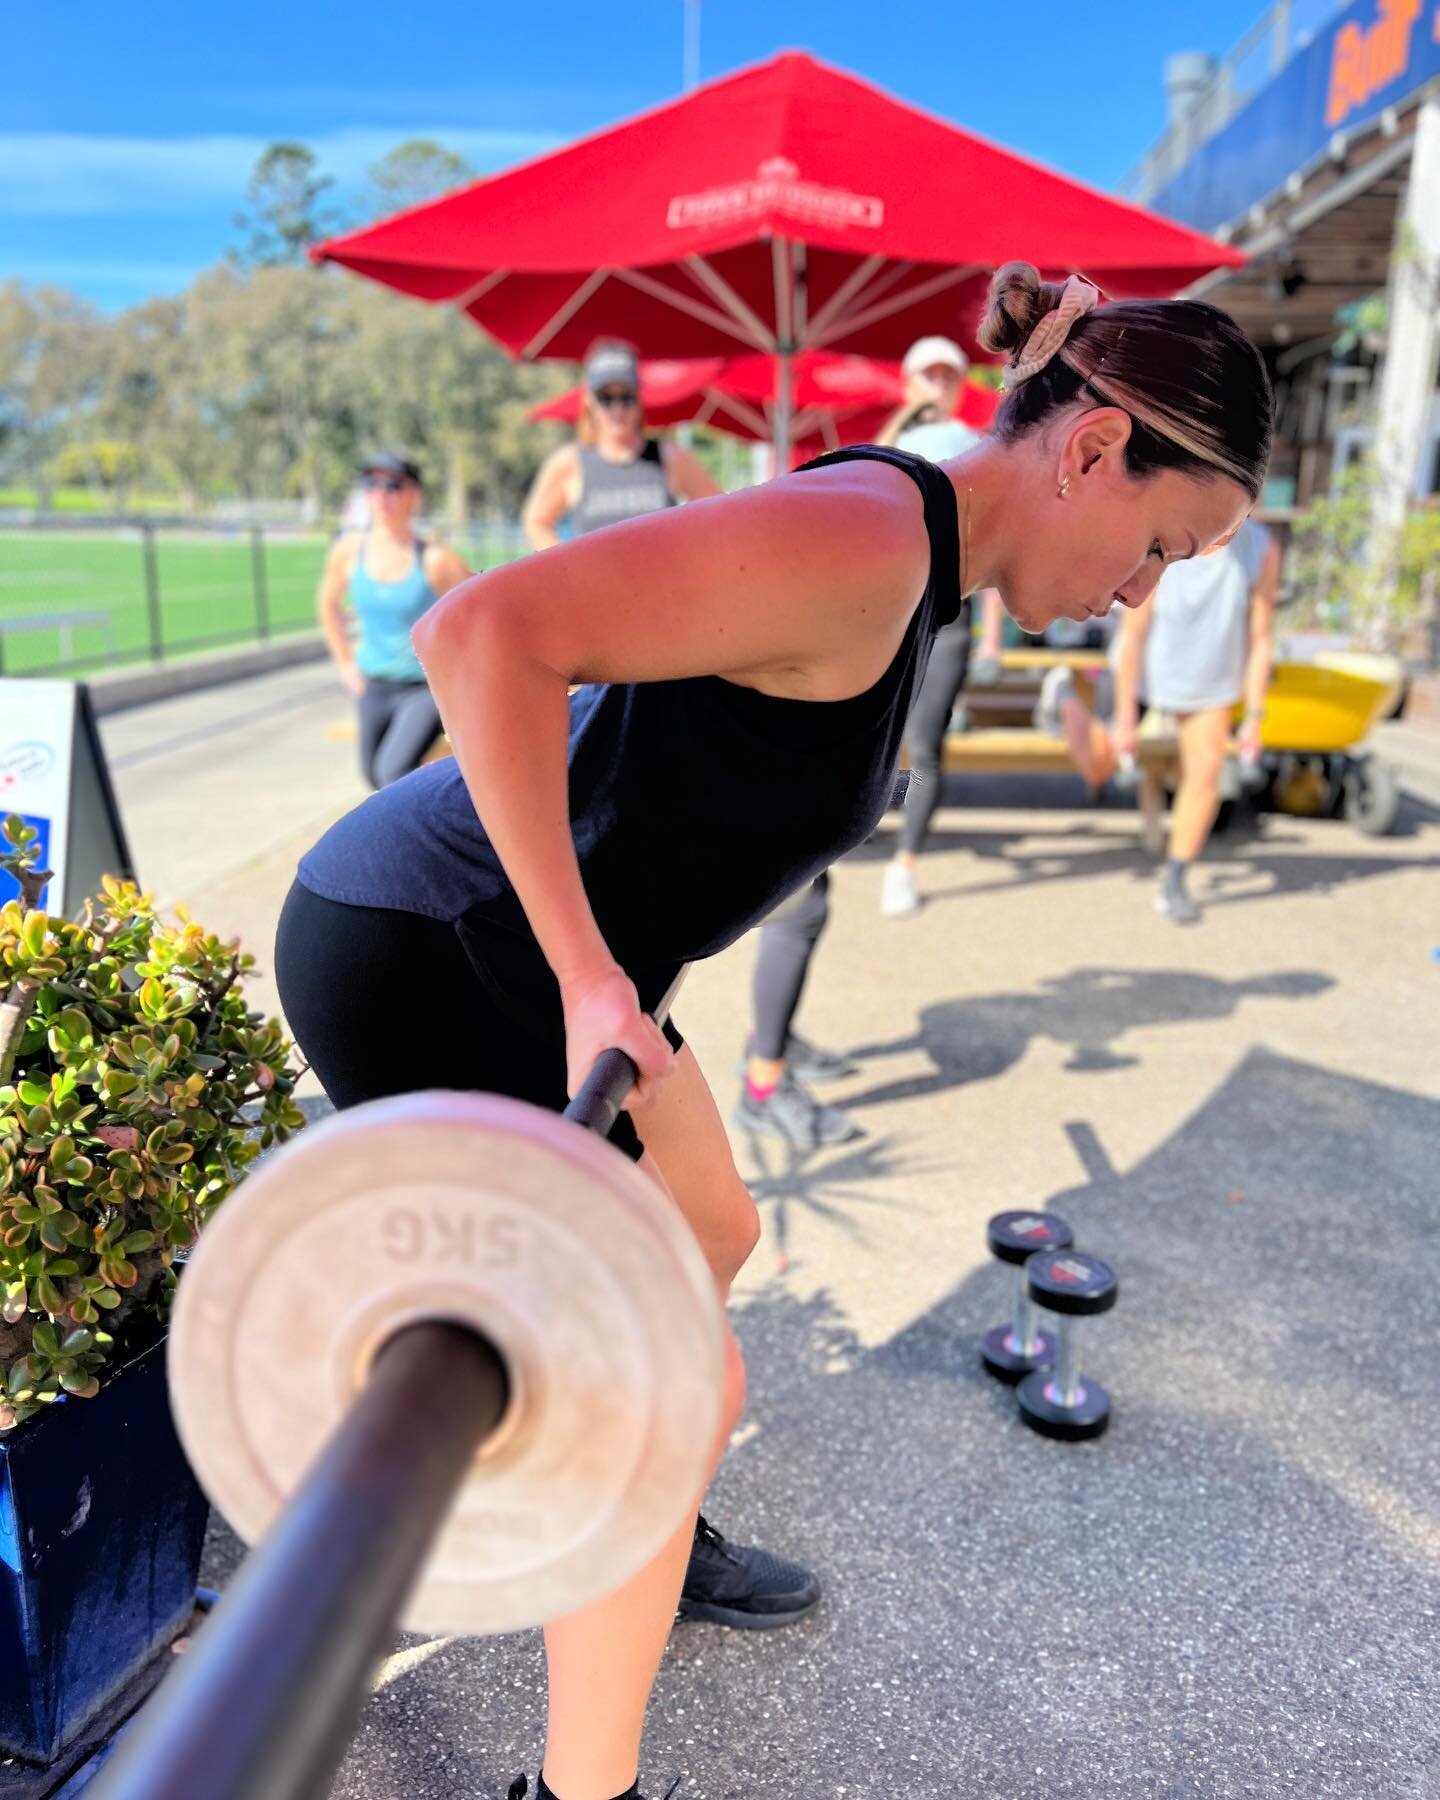 STRONG MAMMA

Strength on weds!! For all levels of fitness, and experience - and all postpartum requirements.

Pottsy here doing some bent rows because she&rsquo;s ready for it! 

Leave Bub with our Nannie&rsquo;s for a session and focus on YOU!! Bec